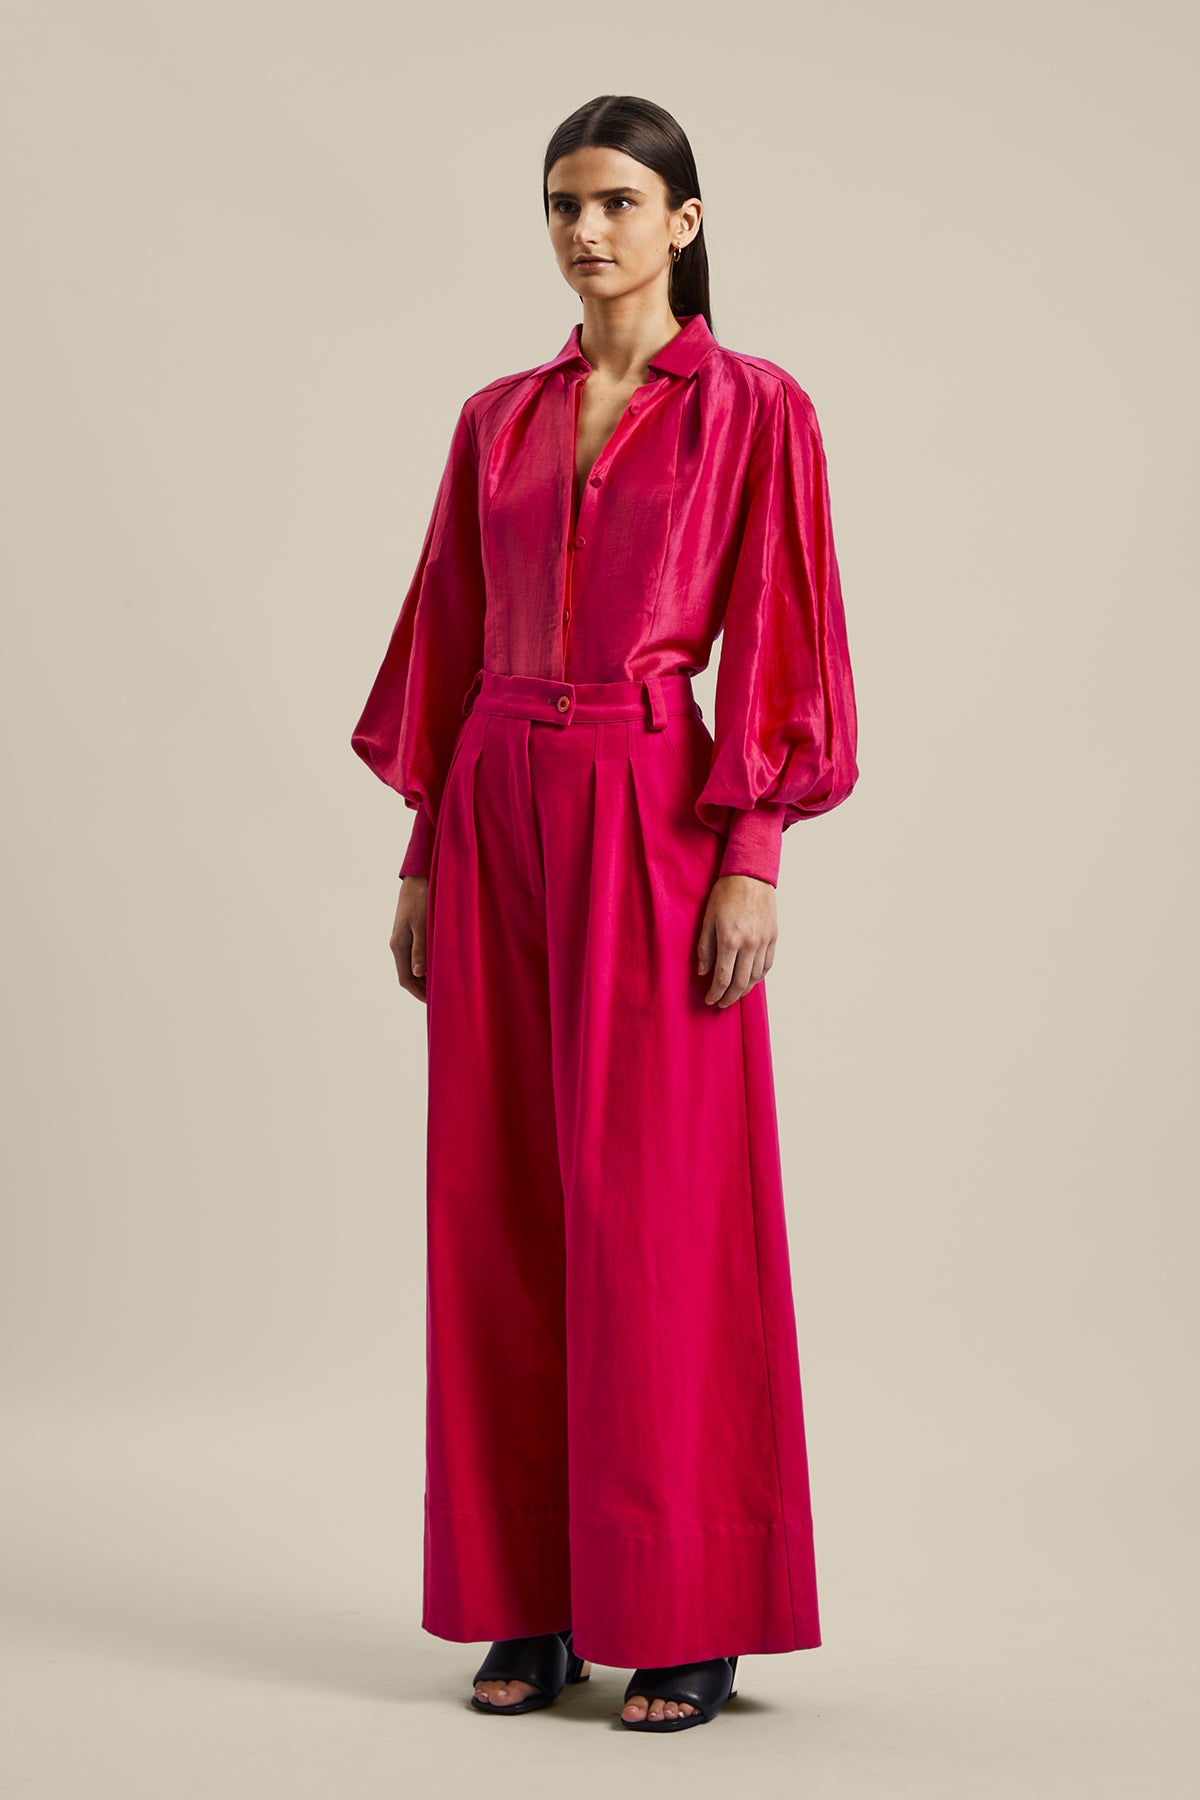 Model wearing the Novelist Pant from Australian women’s designer GINGER & SMART featuring a wide leg and sharp tailoring. Worn with a pink blouse.